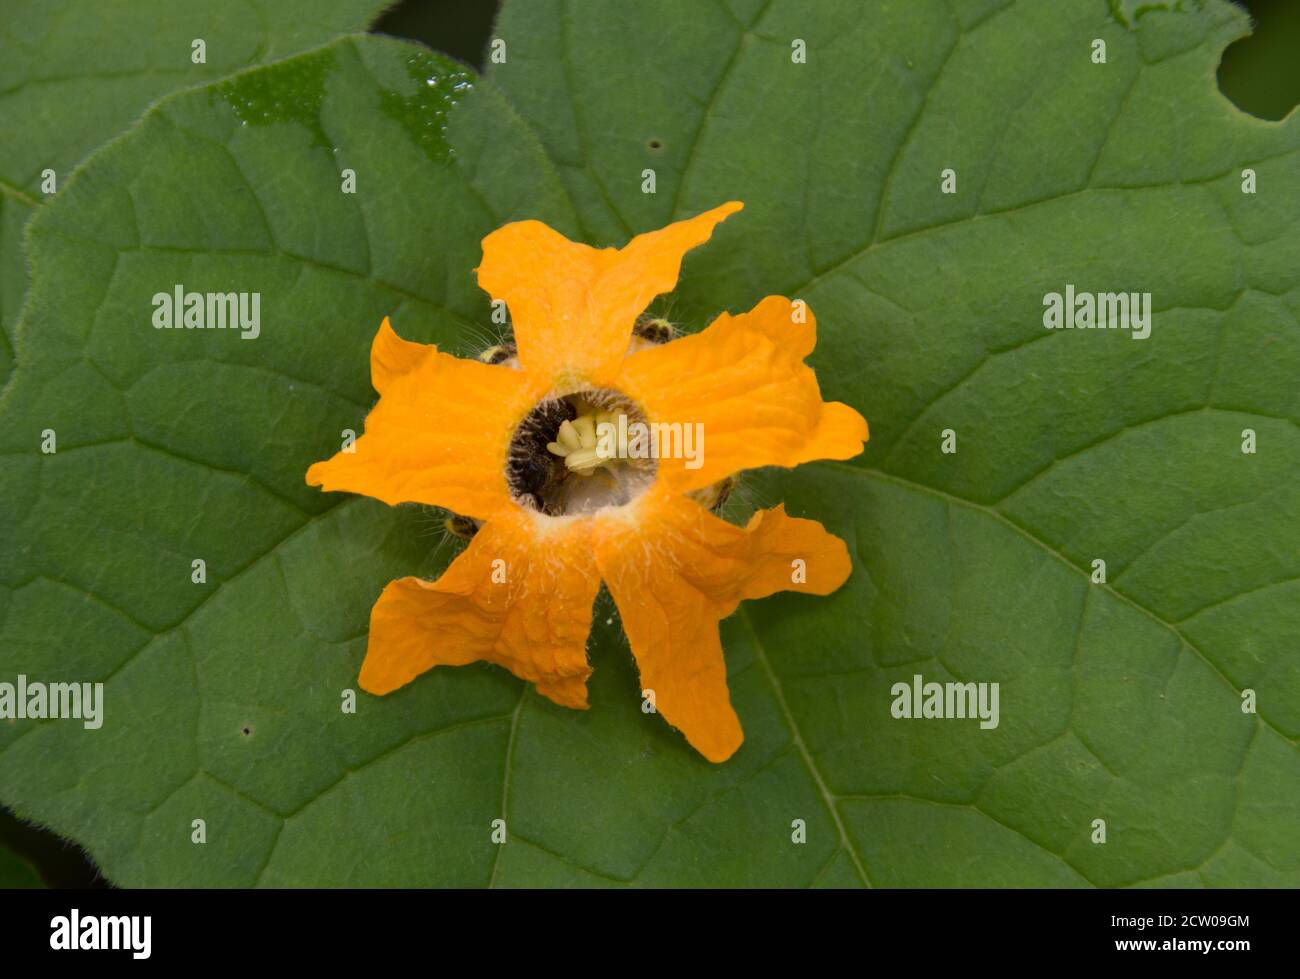 The flowers of the Fish-tail Creeper vary from a yellow-orange to a bright orange. A member of the cucumber family they grow in wetter areas Stock Photo